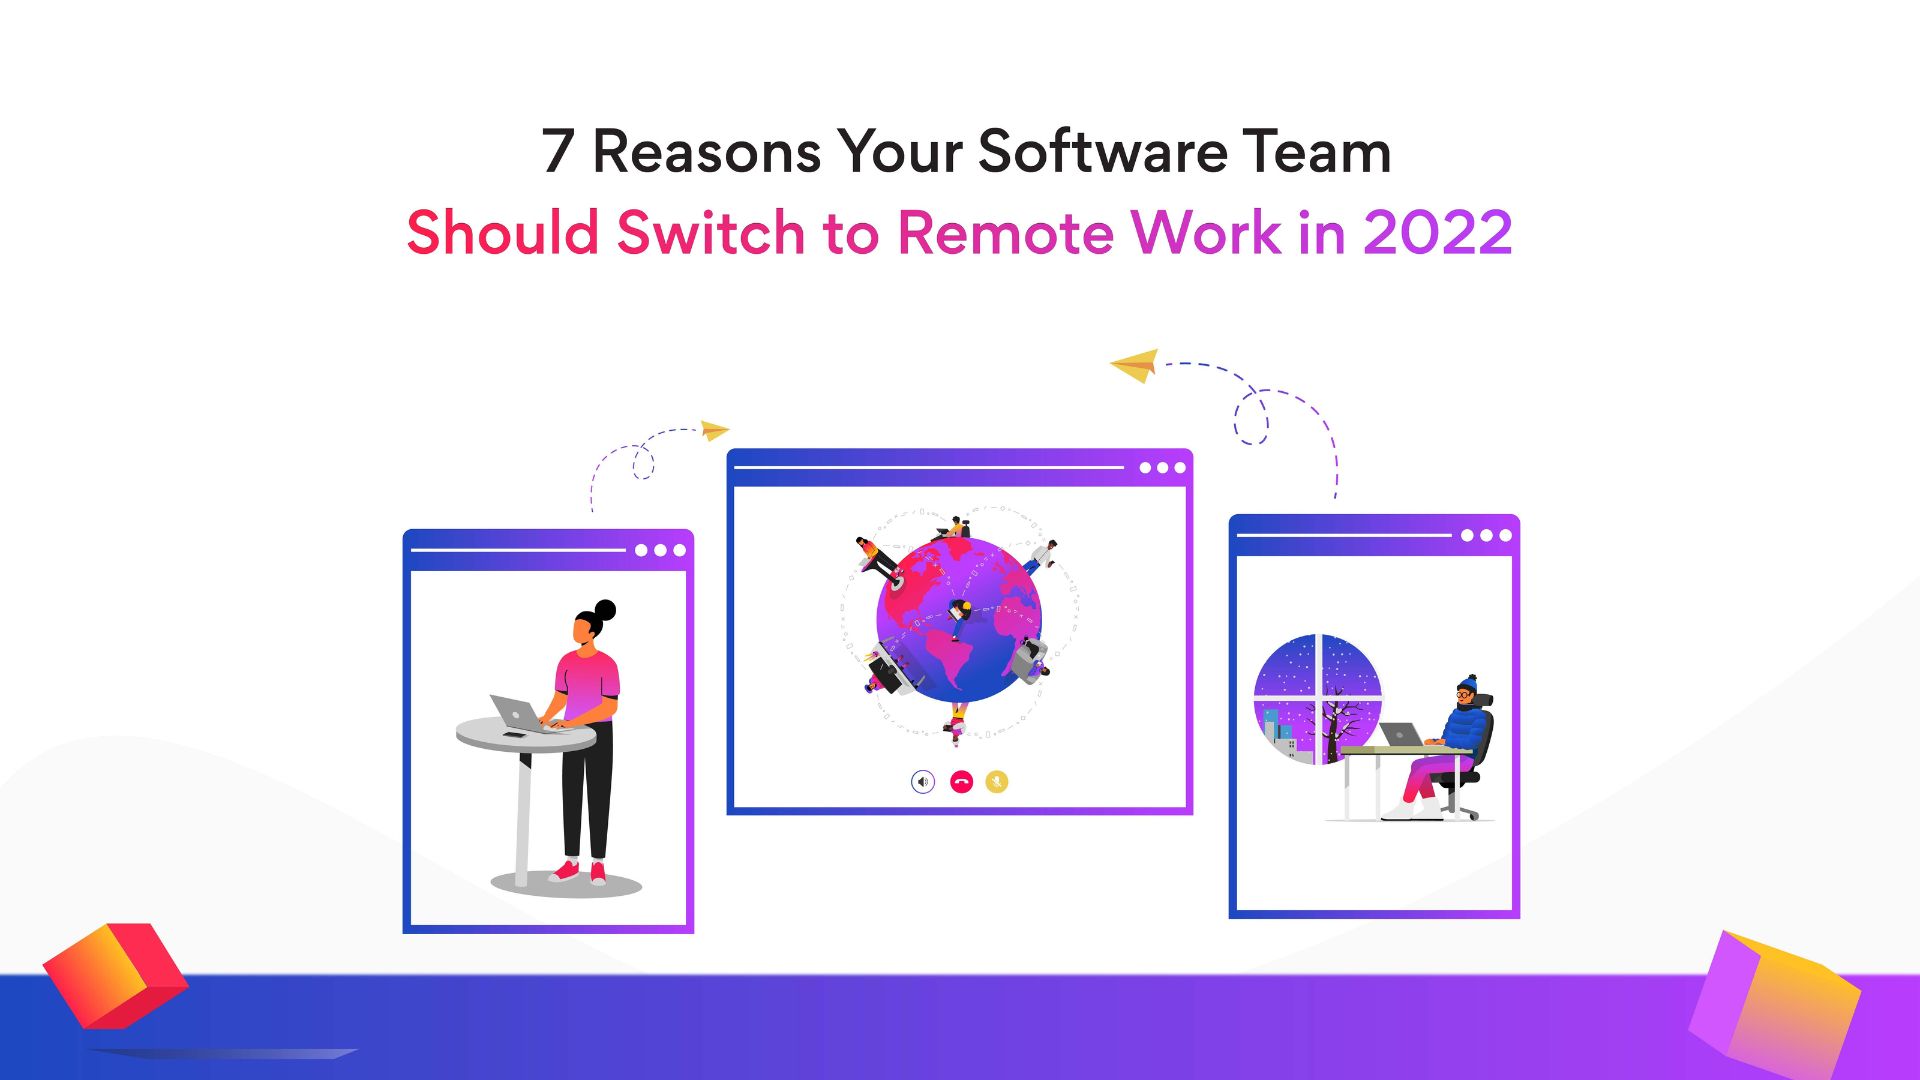 7 reasons your software team should switch to remote work in 2022